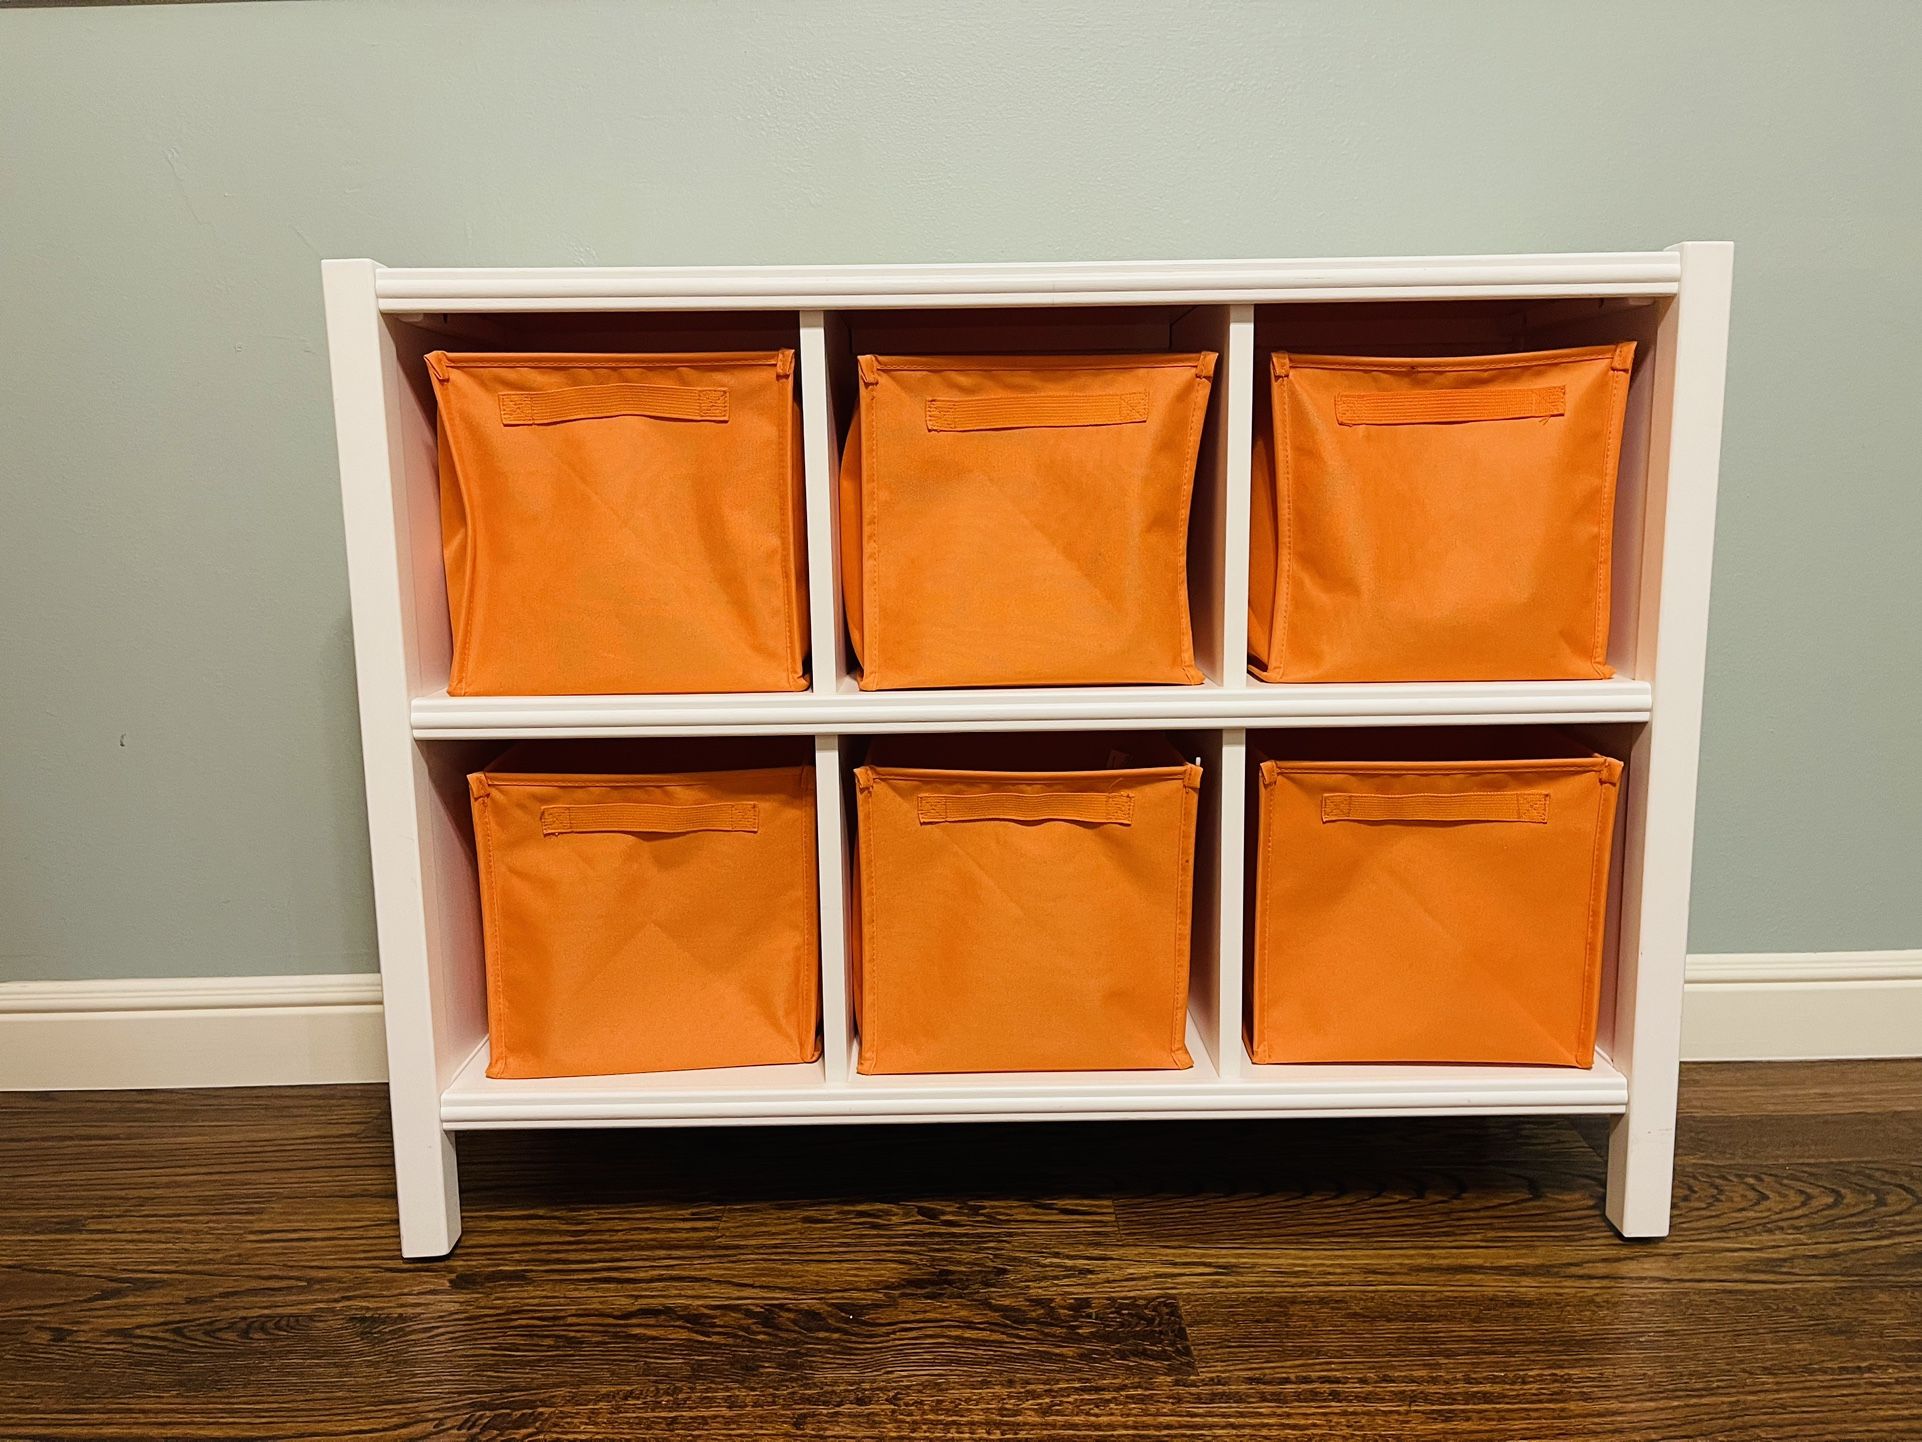 Pottery Barn Kids Toy/Storage Cubby And Cubes